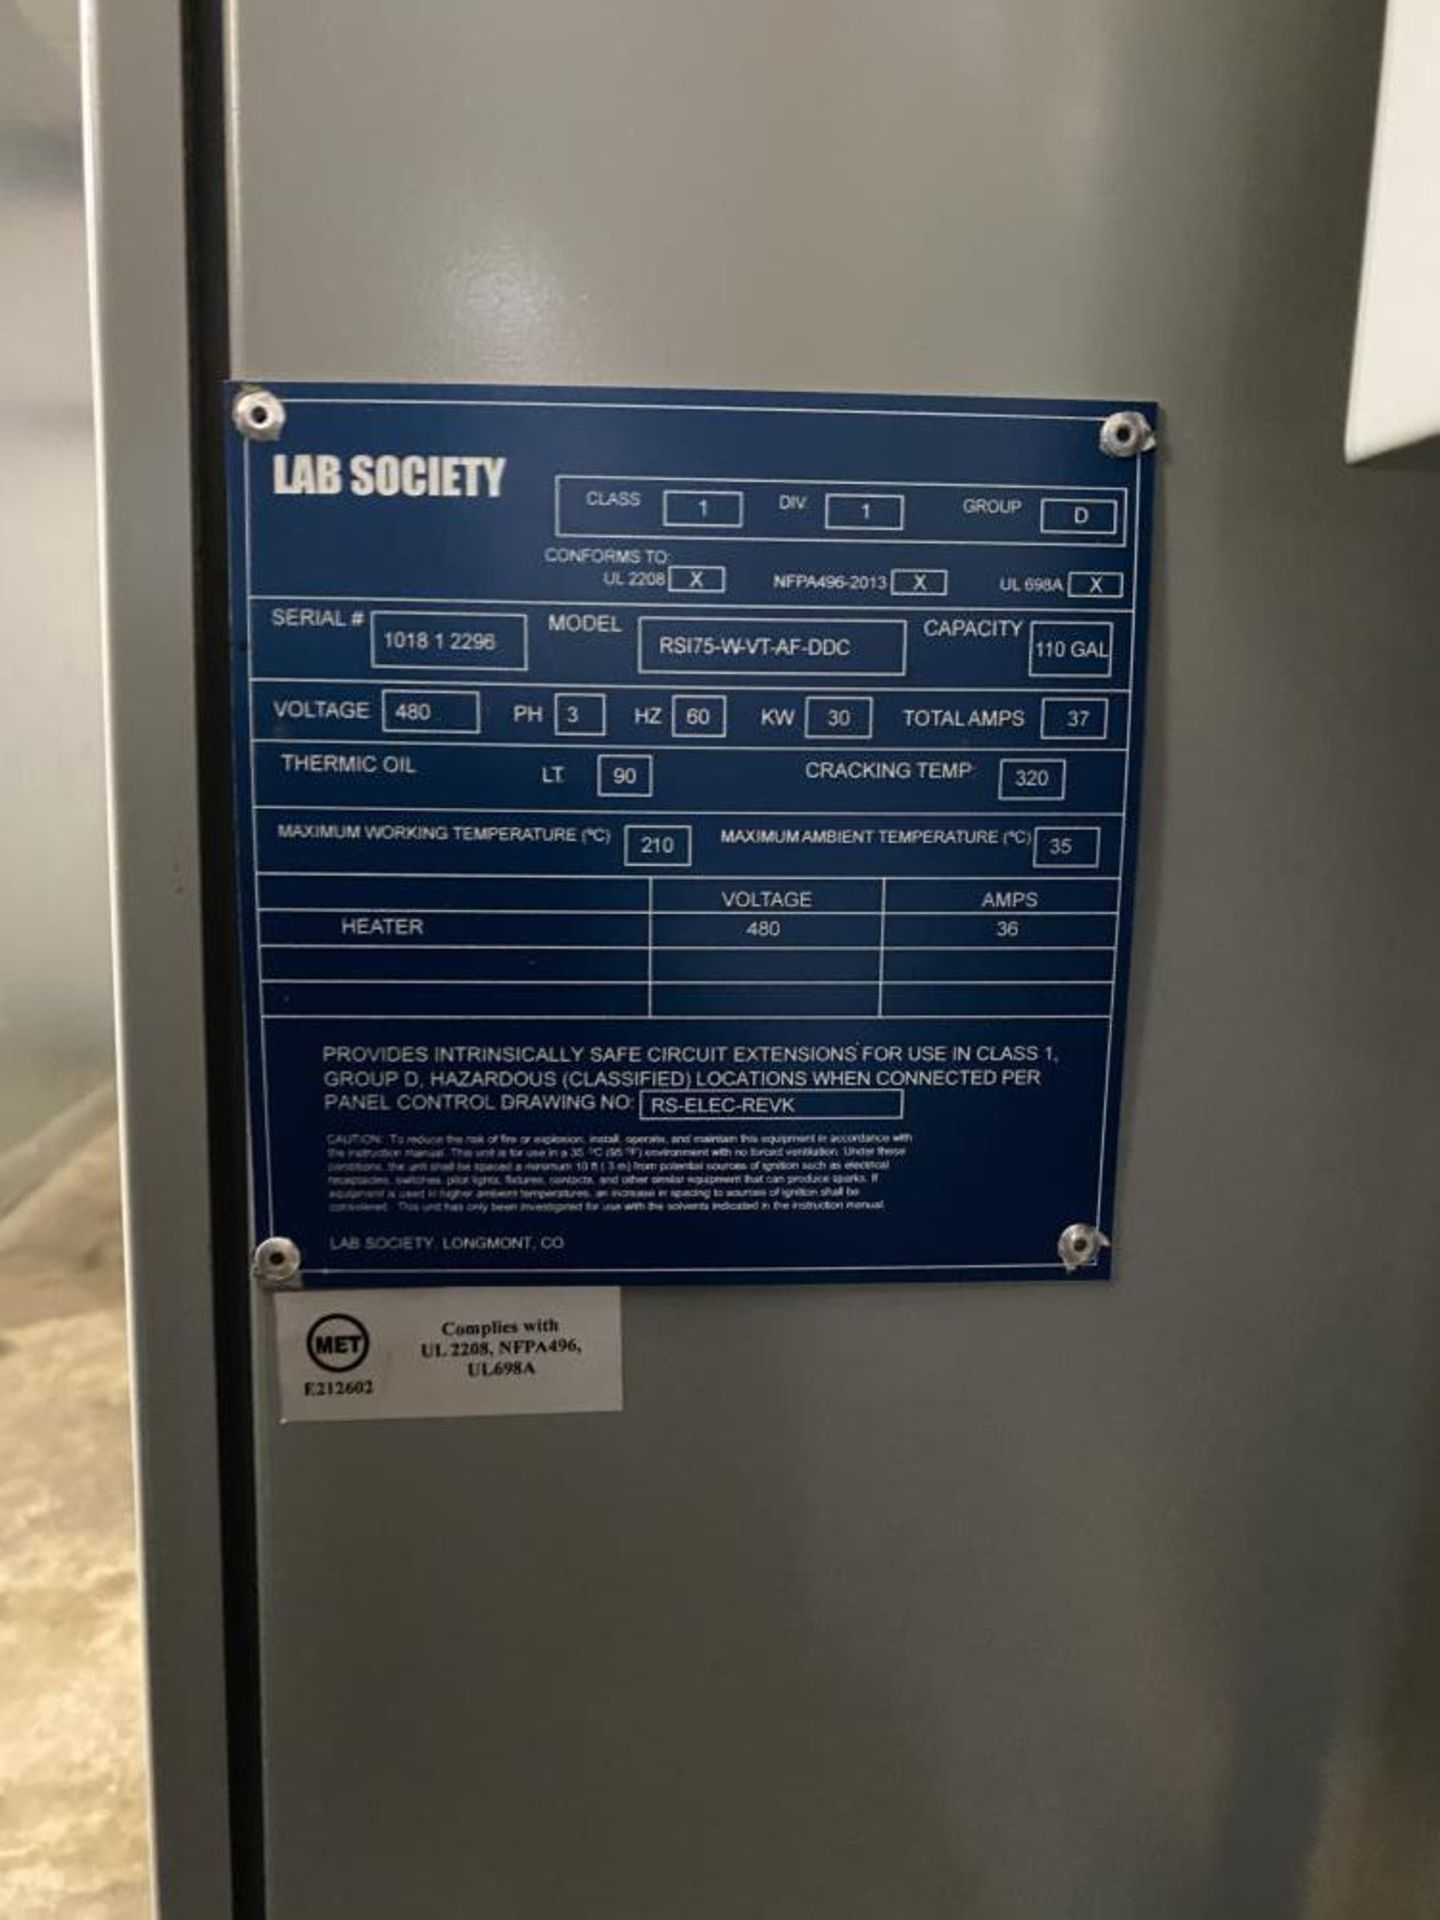 Used Lab Society Automated Solvent Recovery System. Model ASRS - 110 Gal - Image 6 of 6